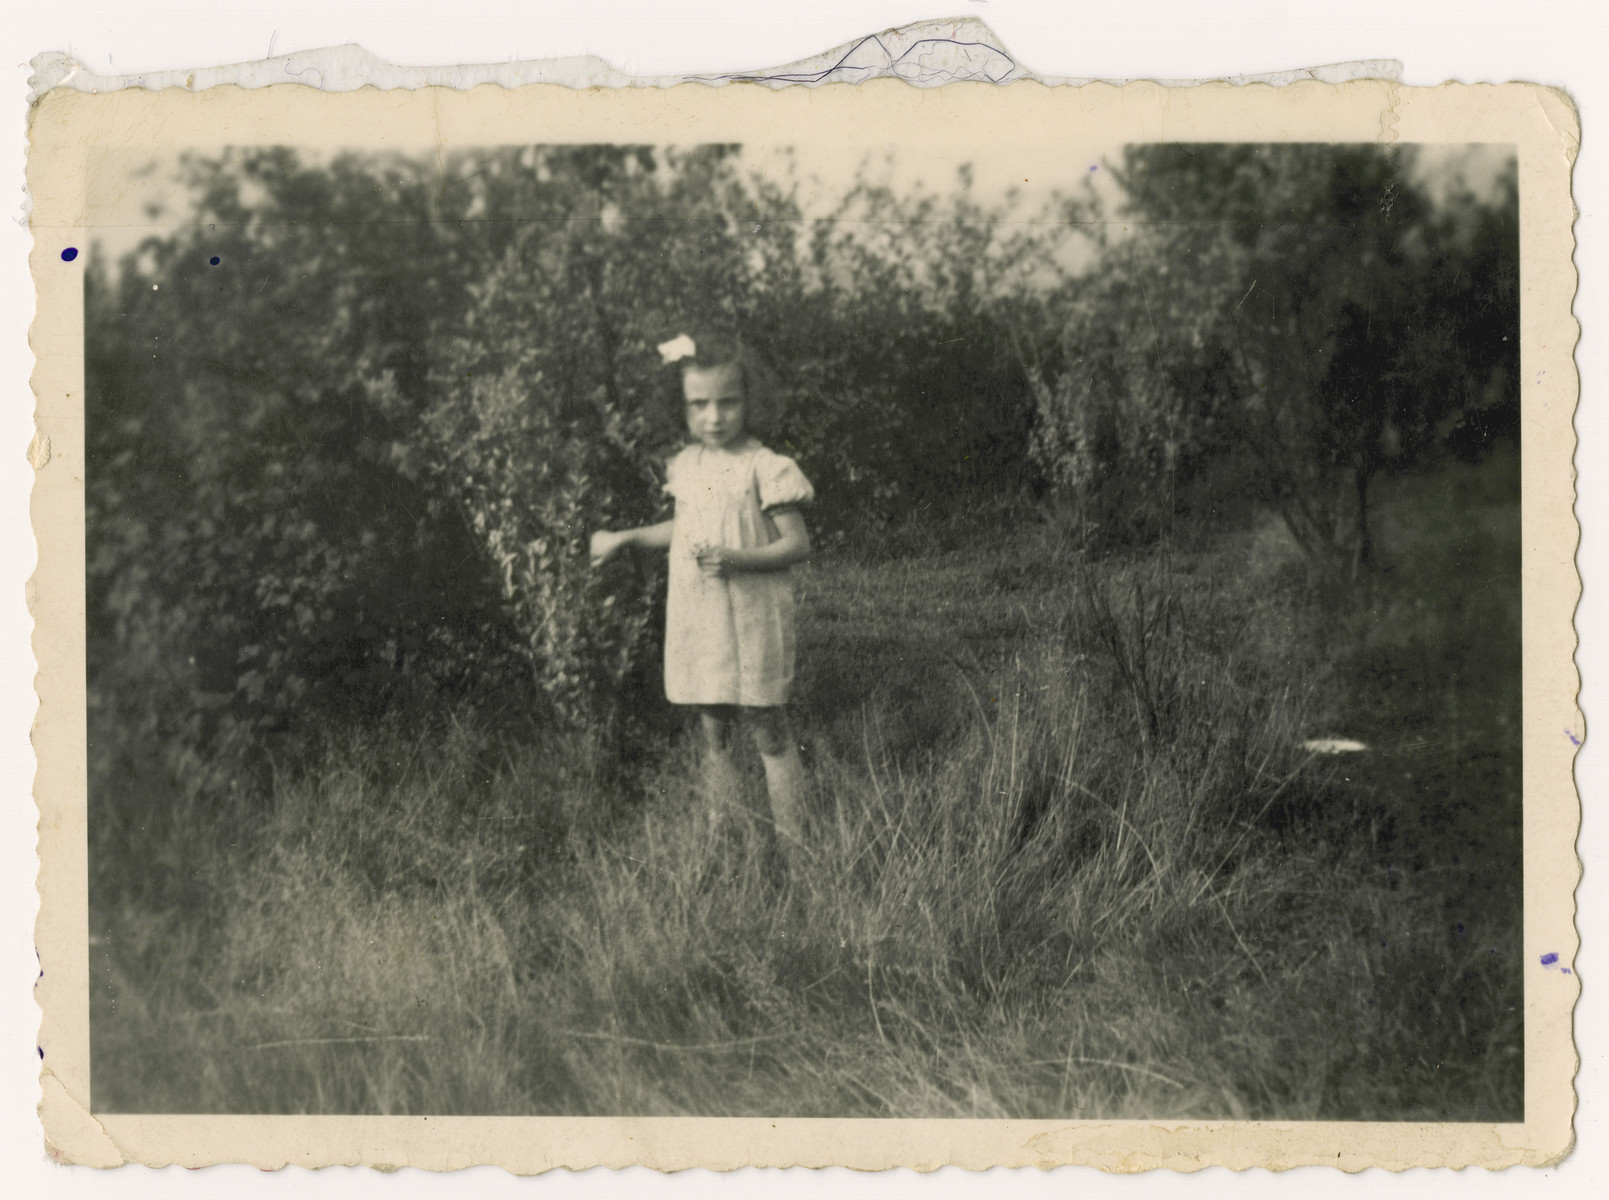 A young Jewish girl who is living in hiding poses outside in a field.

Pictured is Bettie Kipper, a cousin of Nestor Hochglaube.